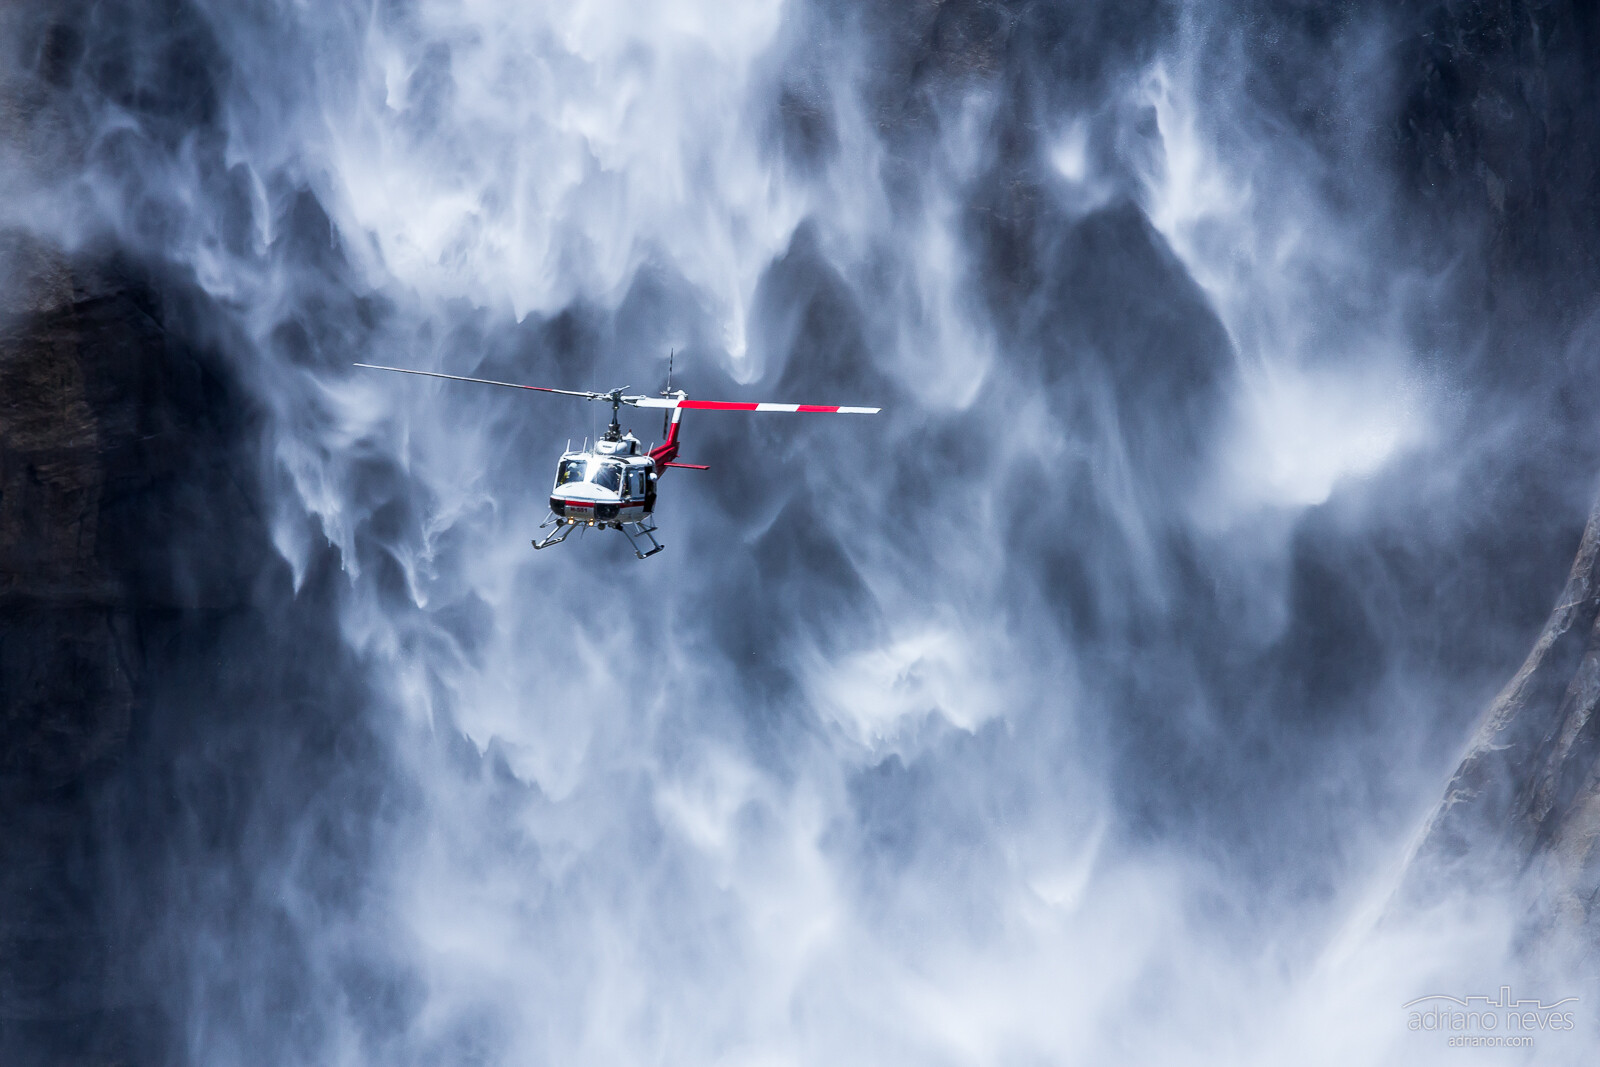 Dramatic freeze motion photograph of an helicopter in front of a giant waterfall - Adriano Neves - @acseven - adrianon.com